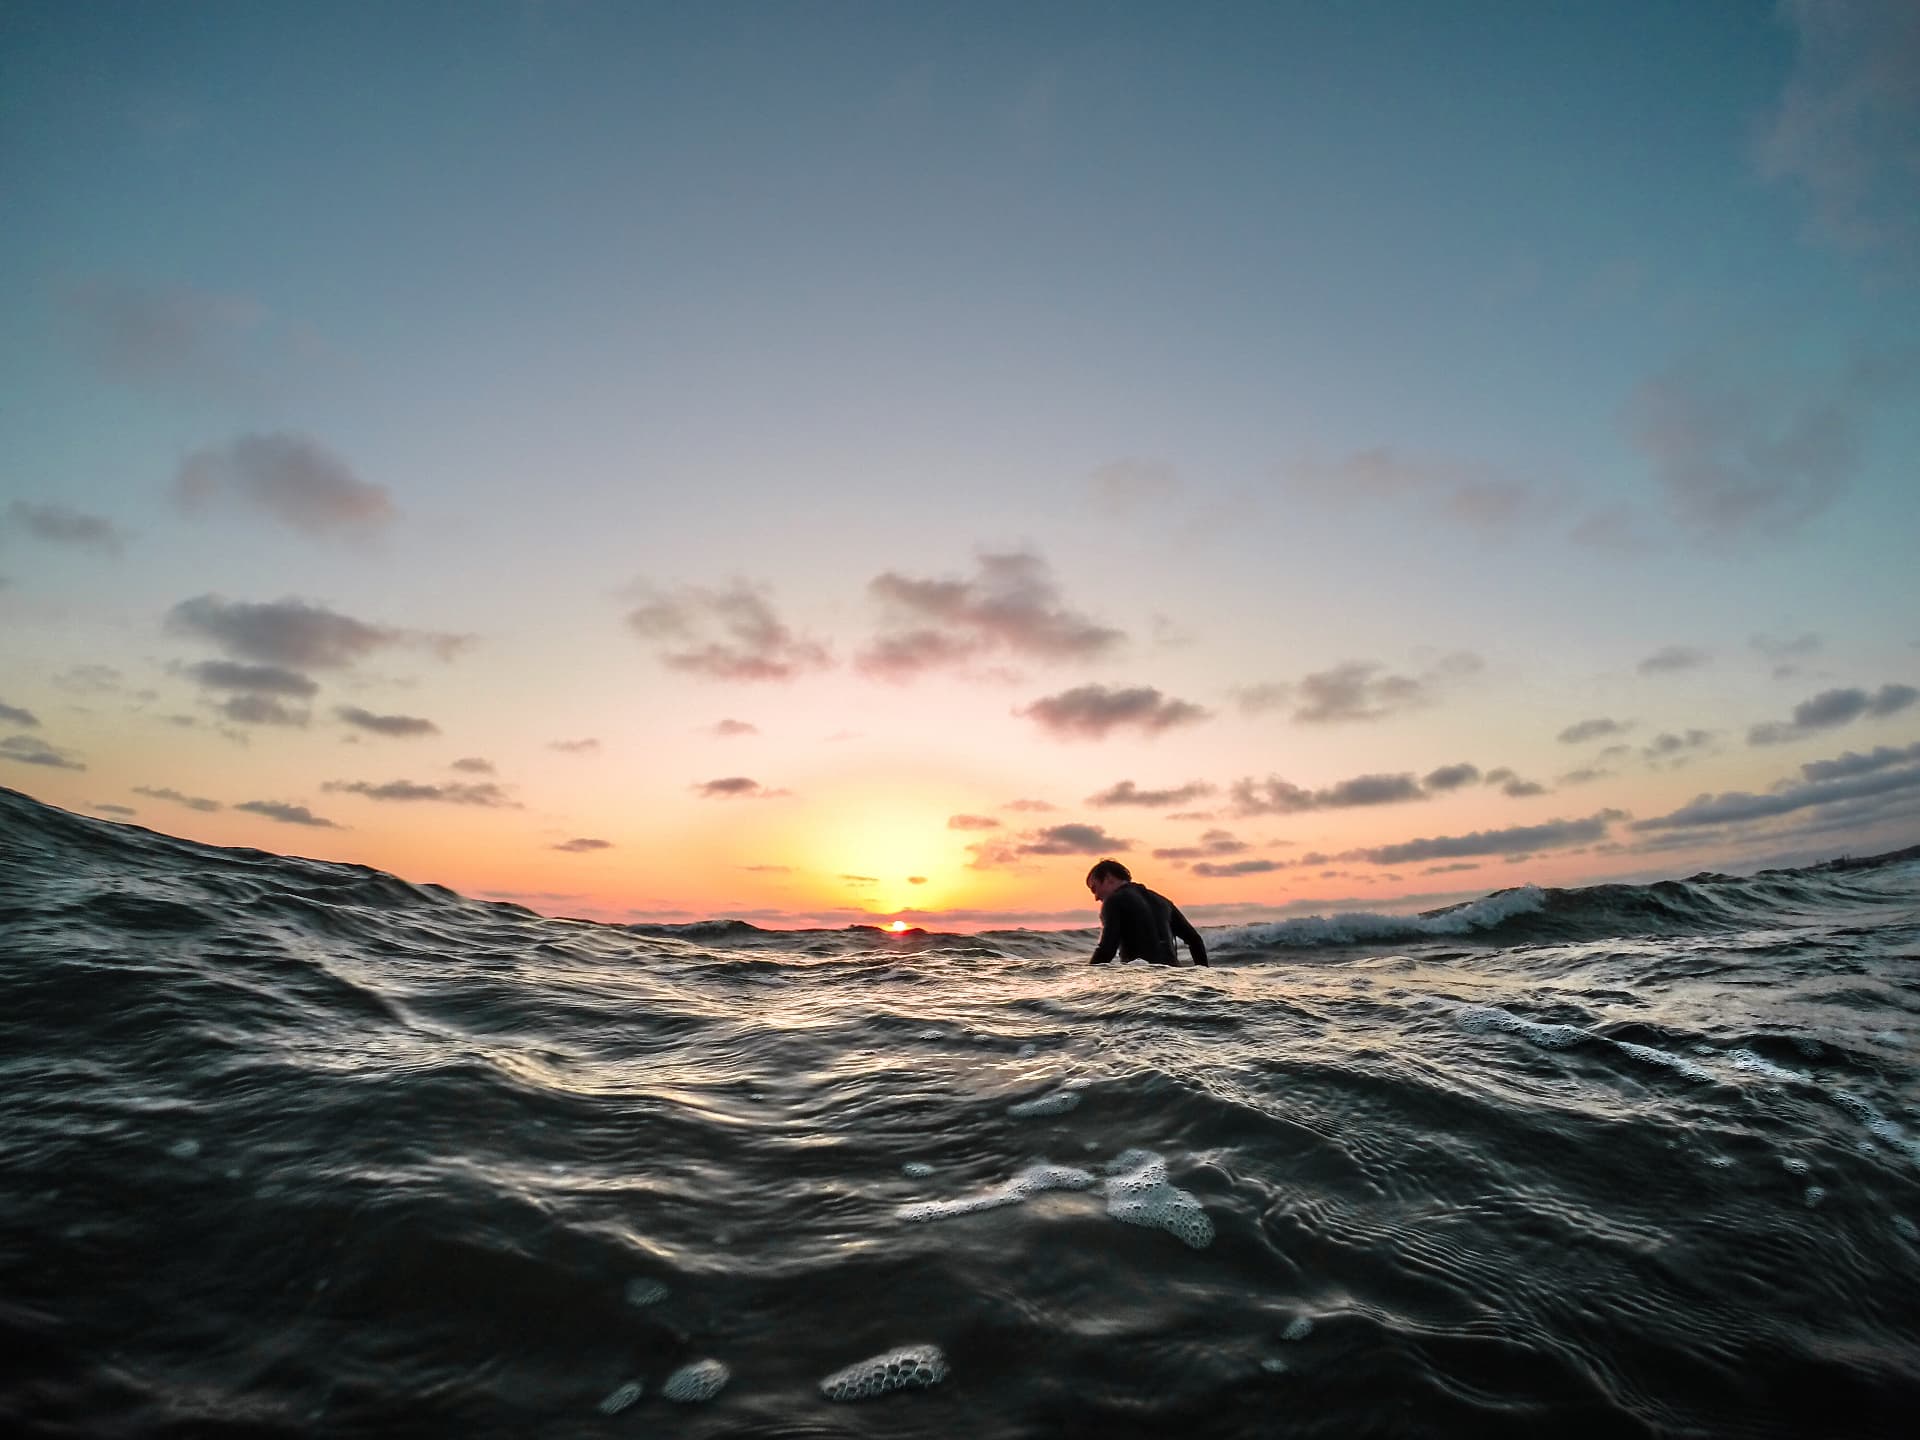 Why do surfers surf so early?